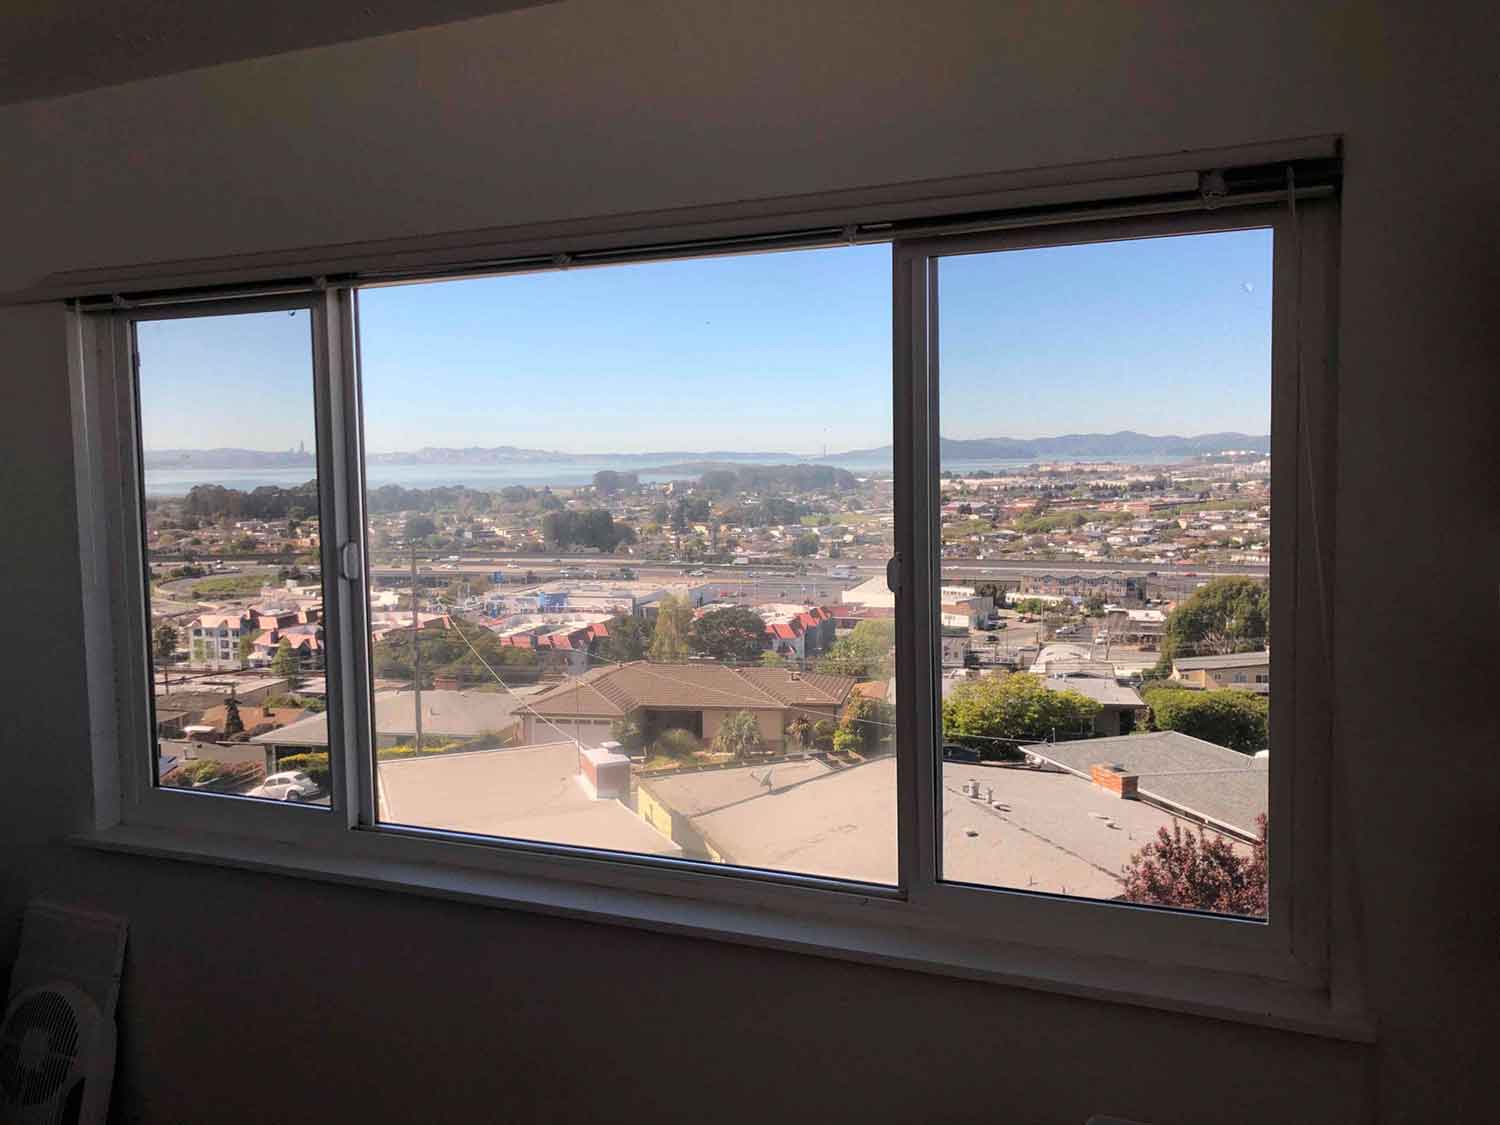 Get the best window tint for your El Cerrito Home with ClimatePro.